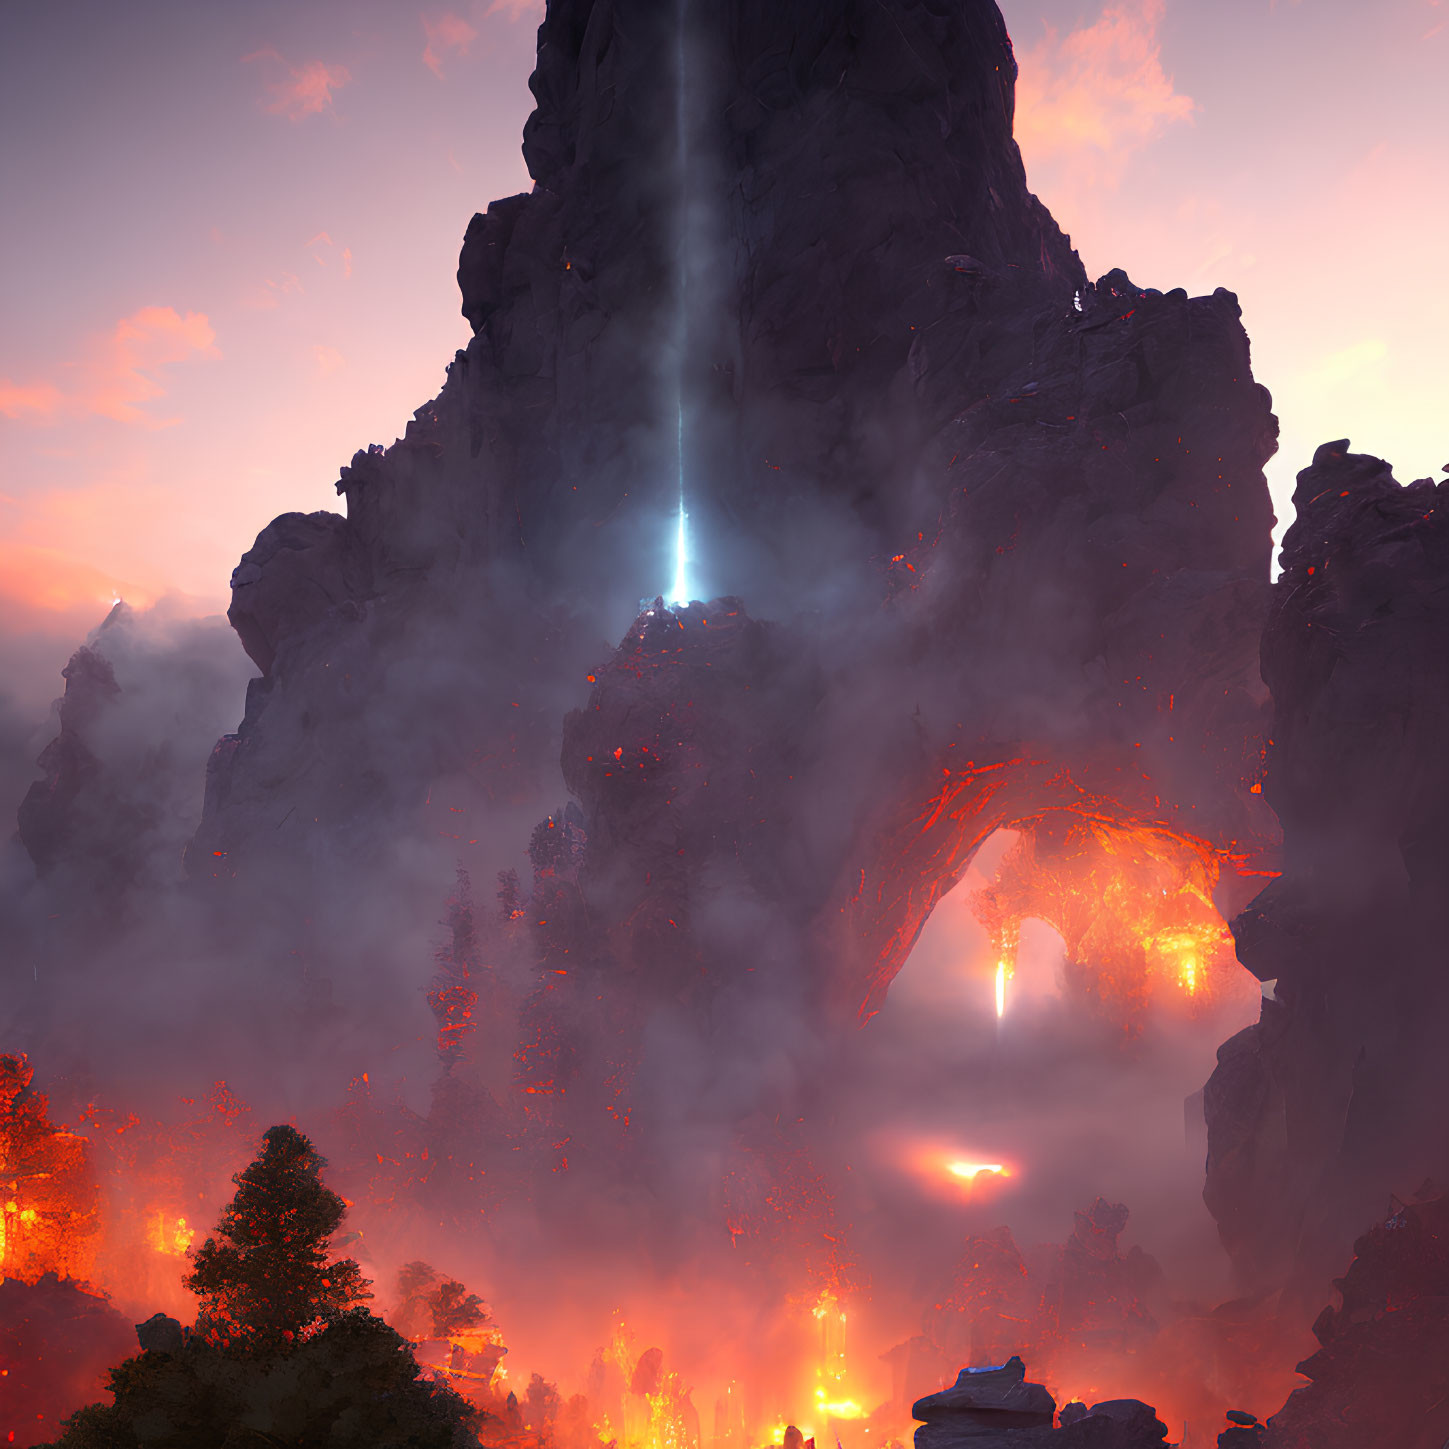 Volcanic landscape with molten lava, central spire, blue light, red sky, glowing